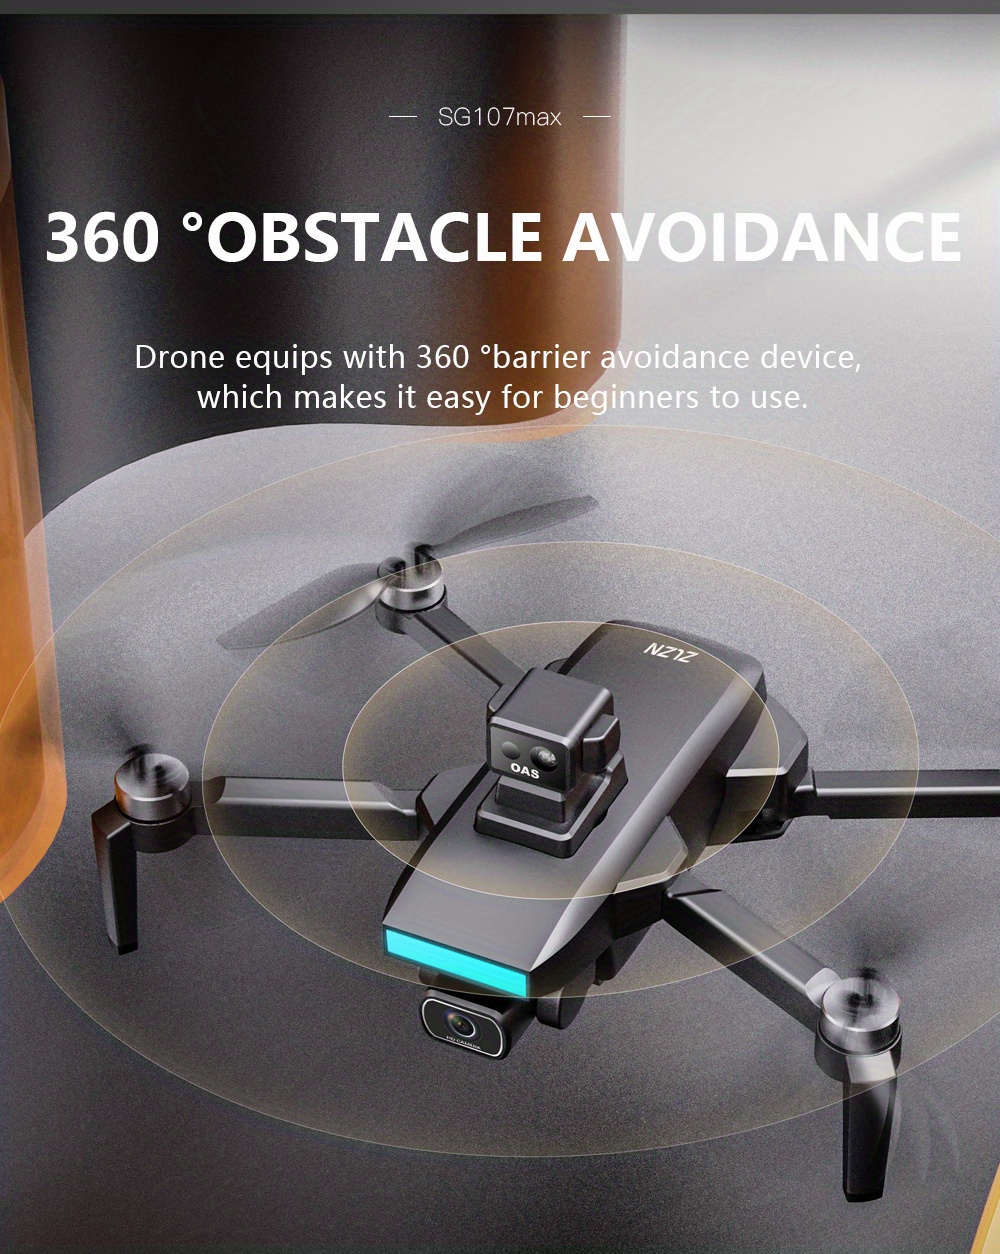 smart follow drone with 2 axis gimbal esc camera gps positioning more one key take off landing headless mode details 2